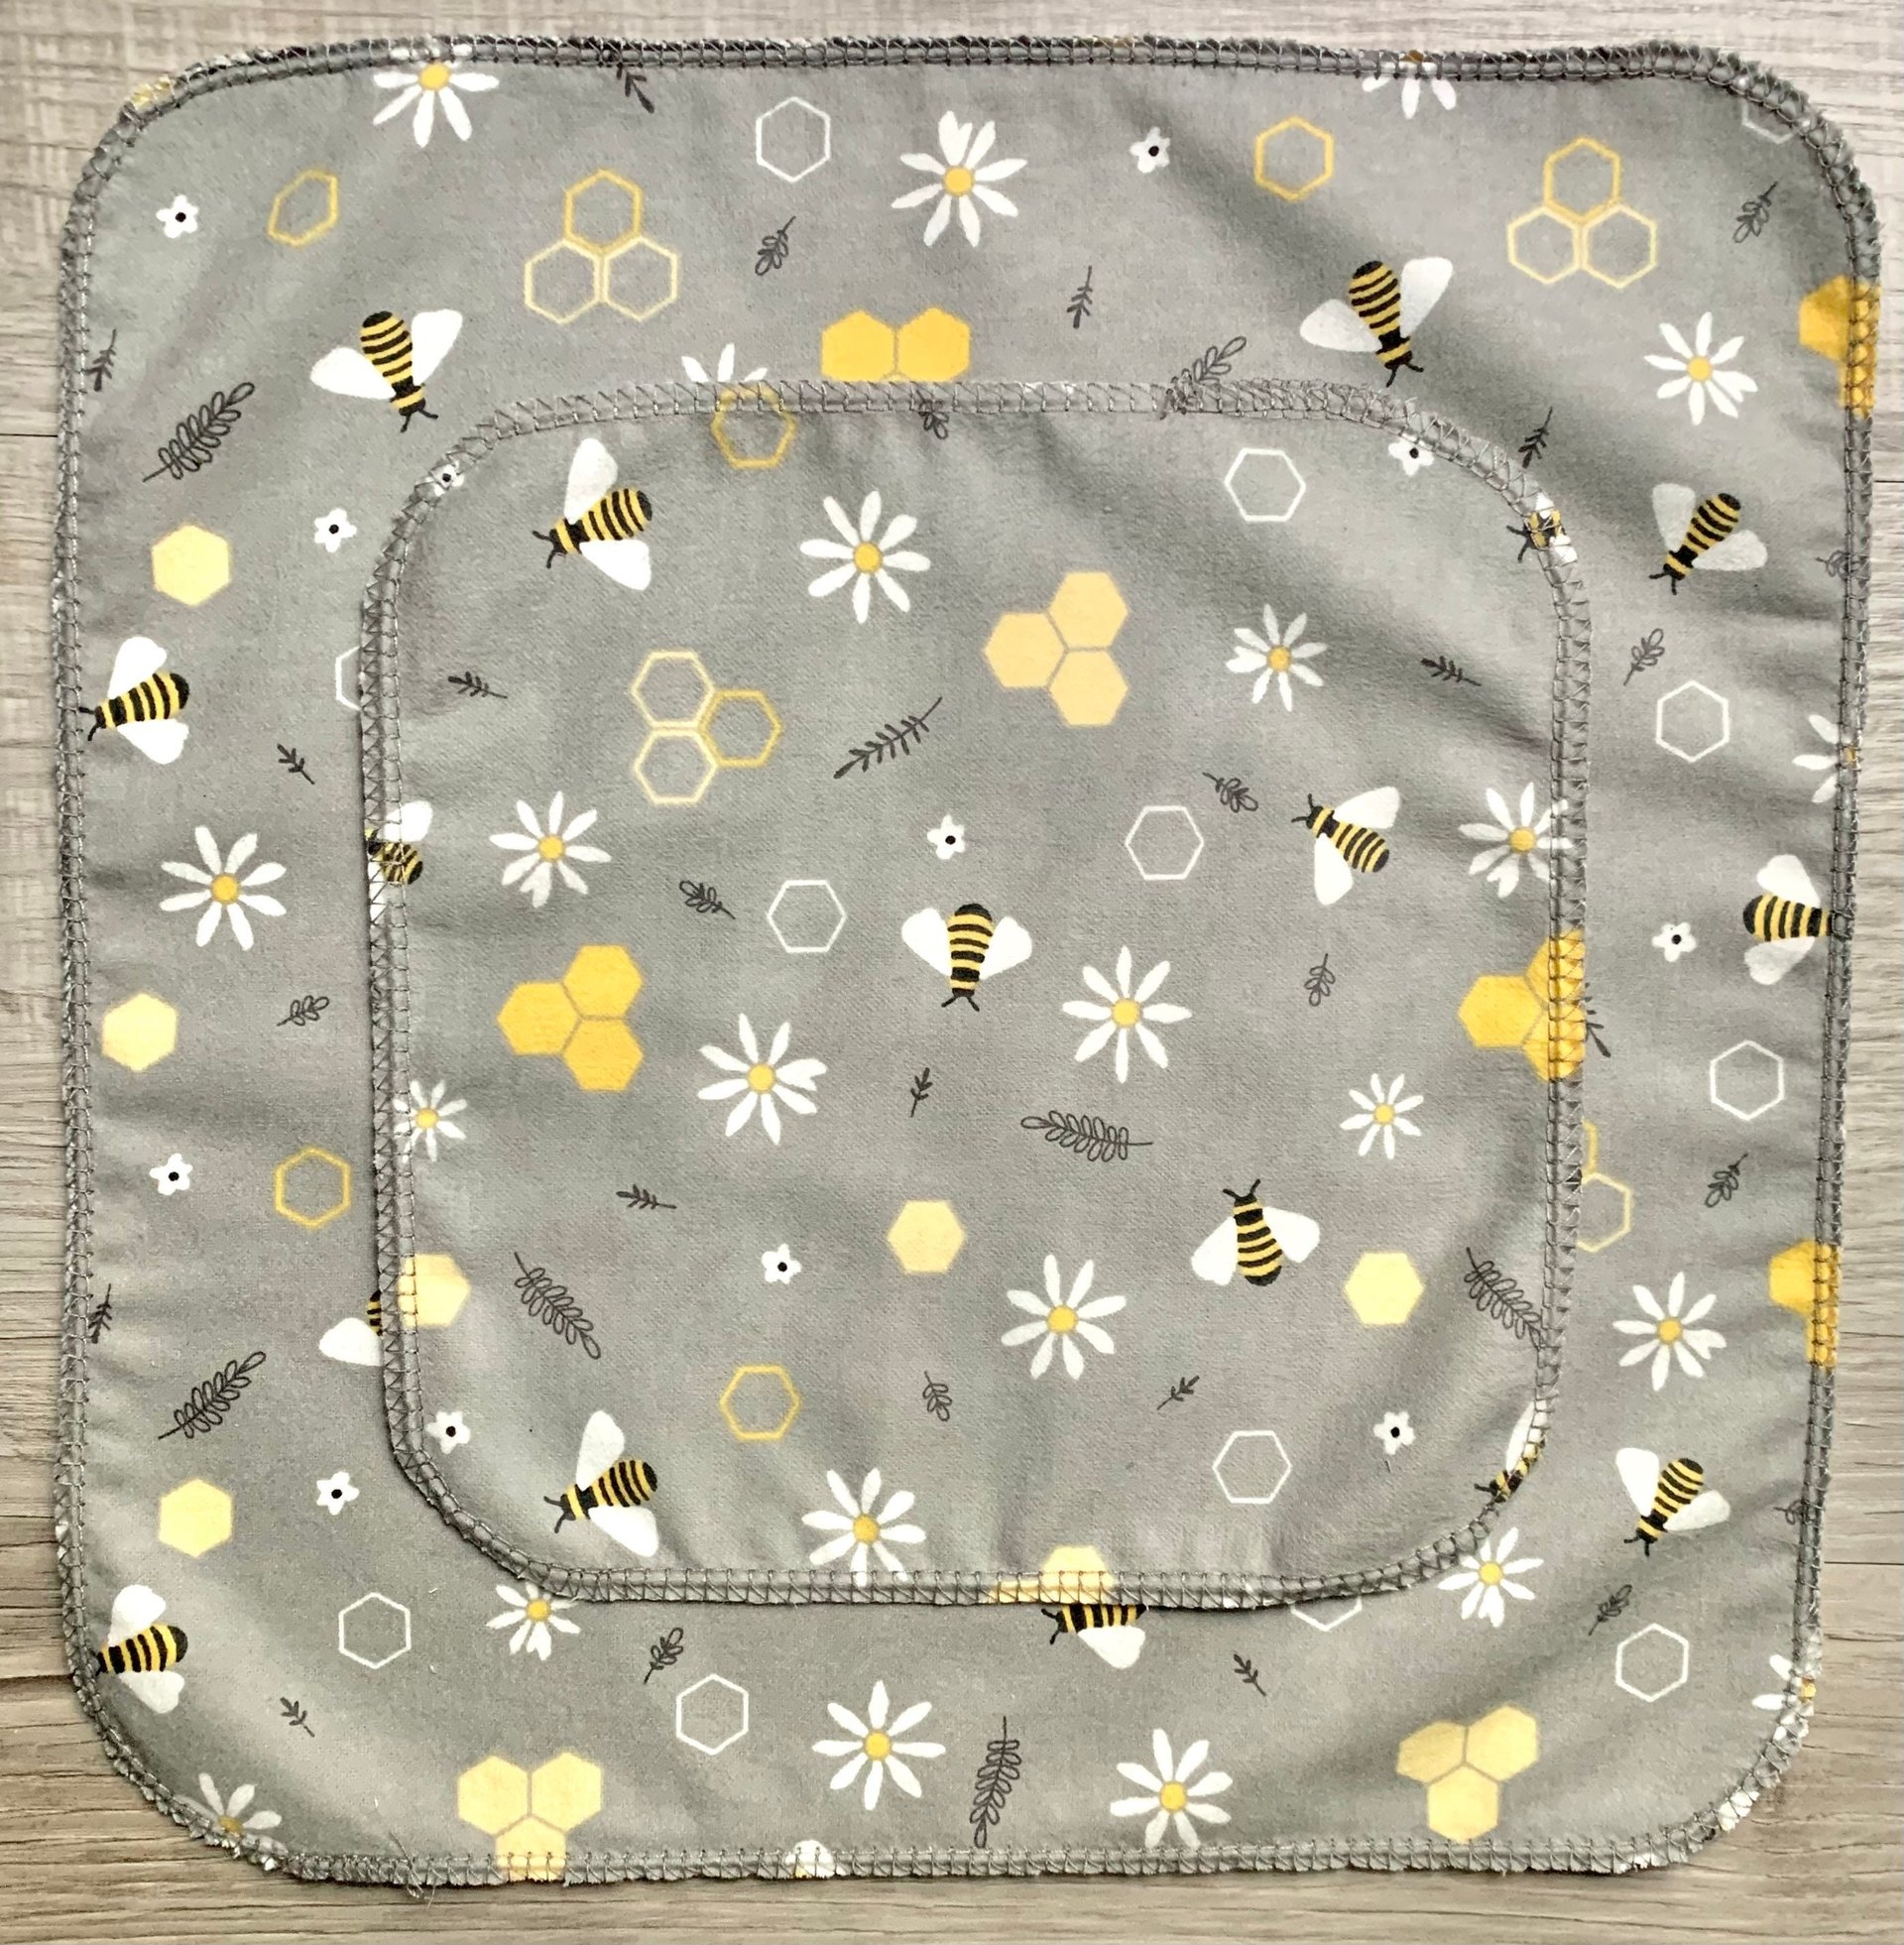 Bee’s & Daisies on grey Paperless Towels || Unpaper Towels || Eco Sustainable Kitchen